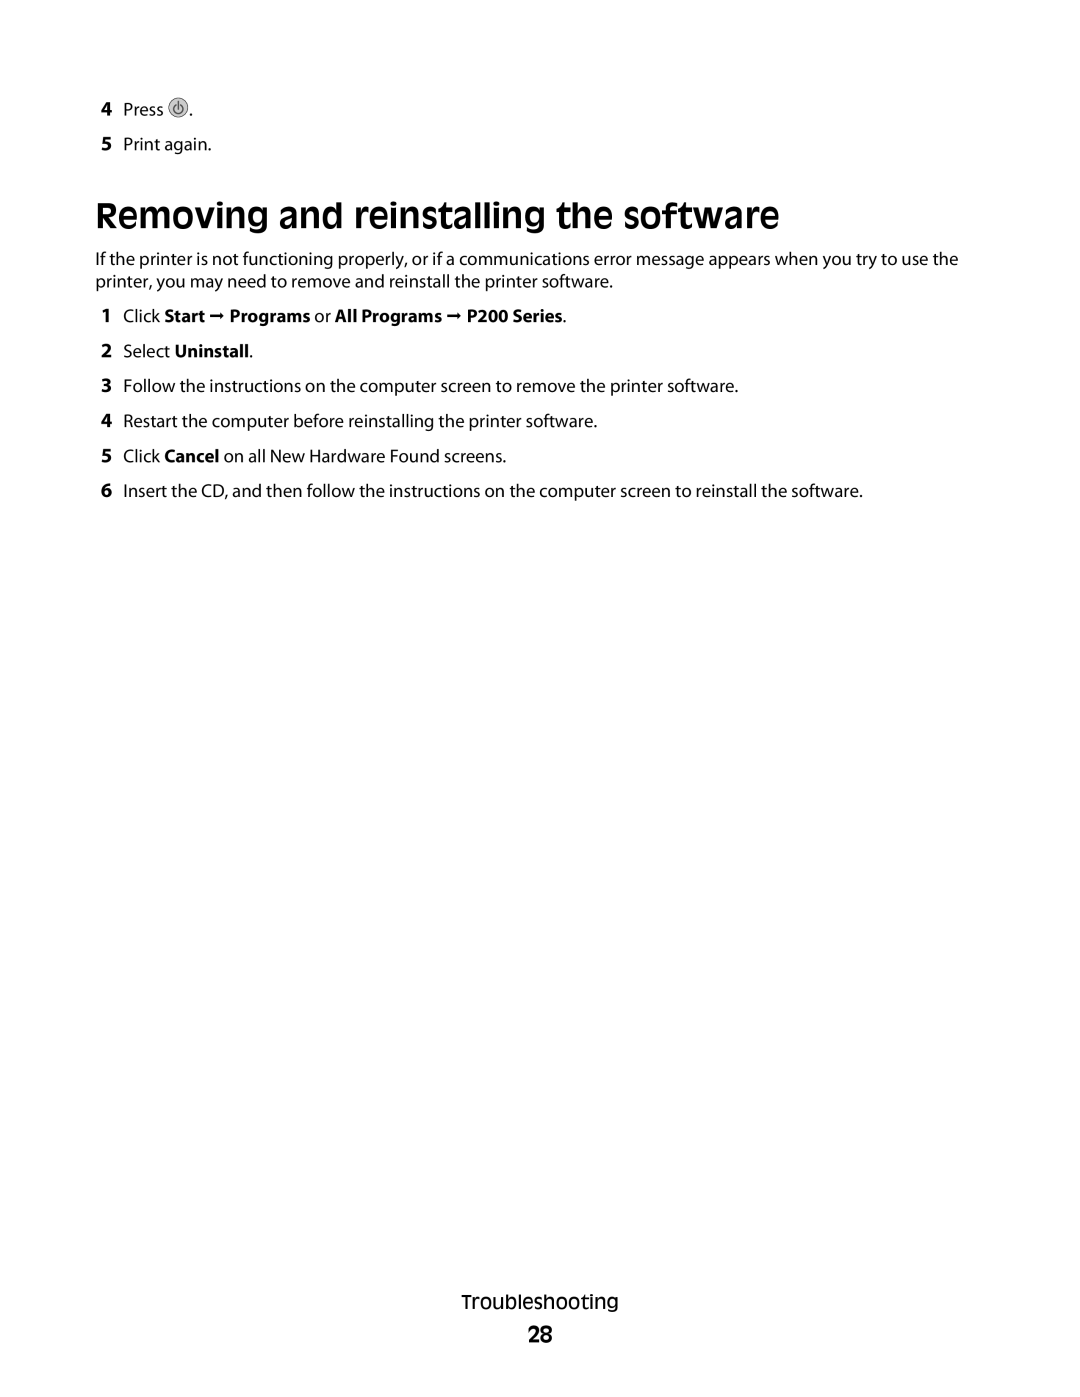 Lexmark P200 Series manual Removing and reinstalling the software, Select Uninstall 